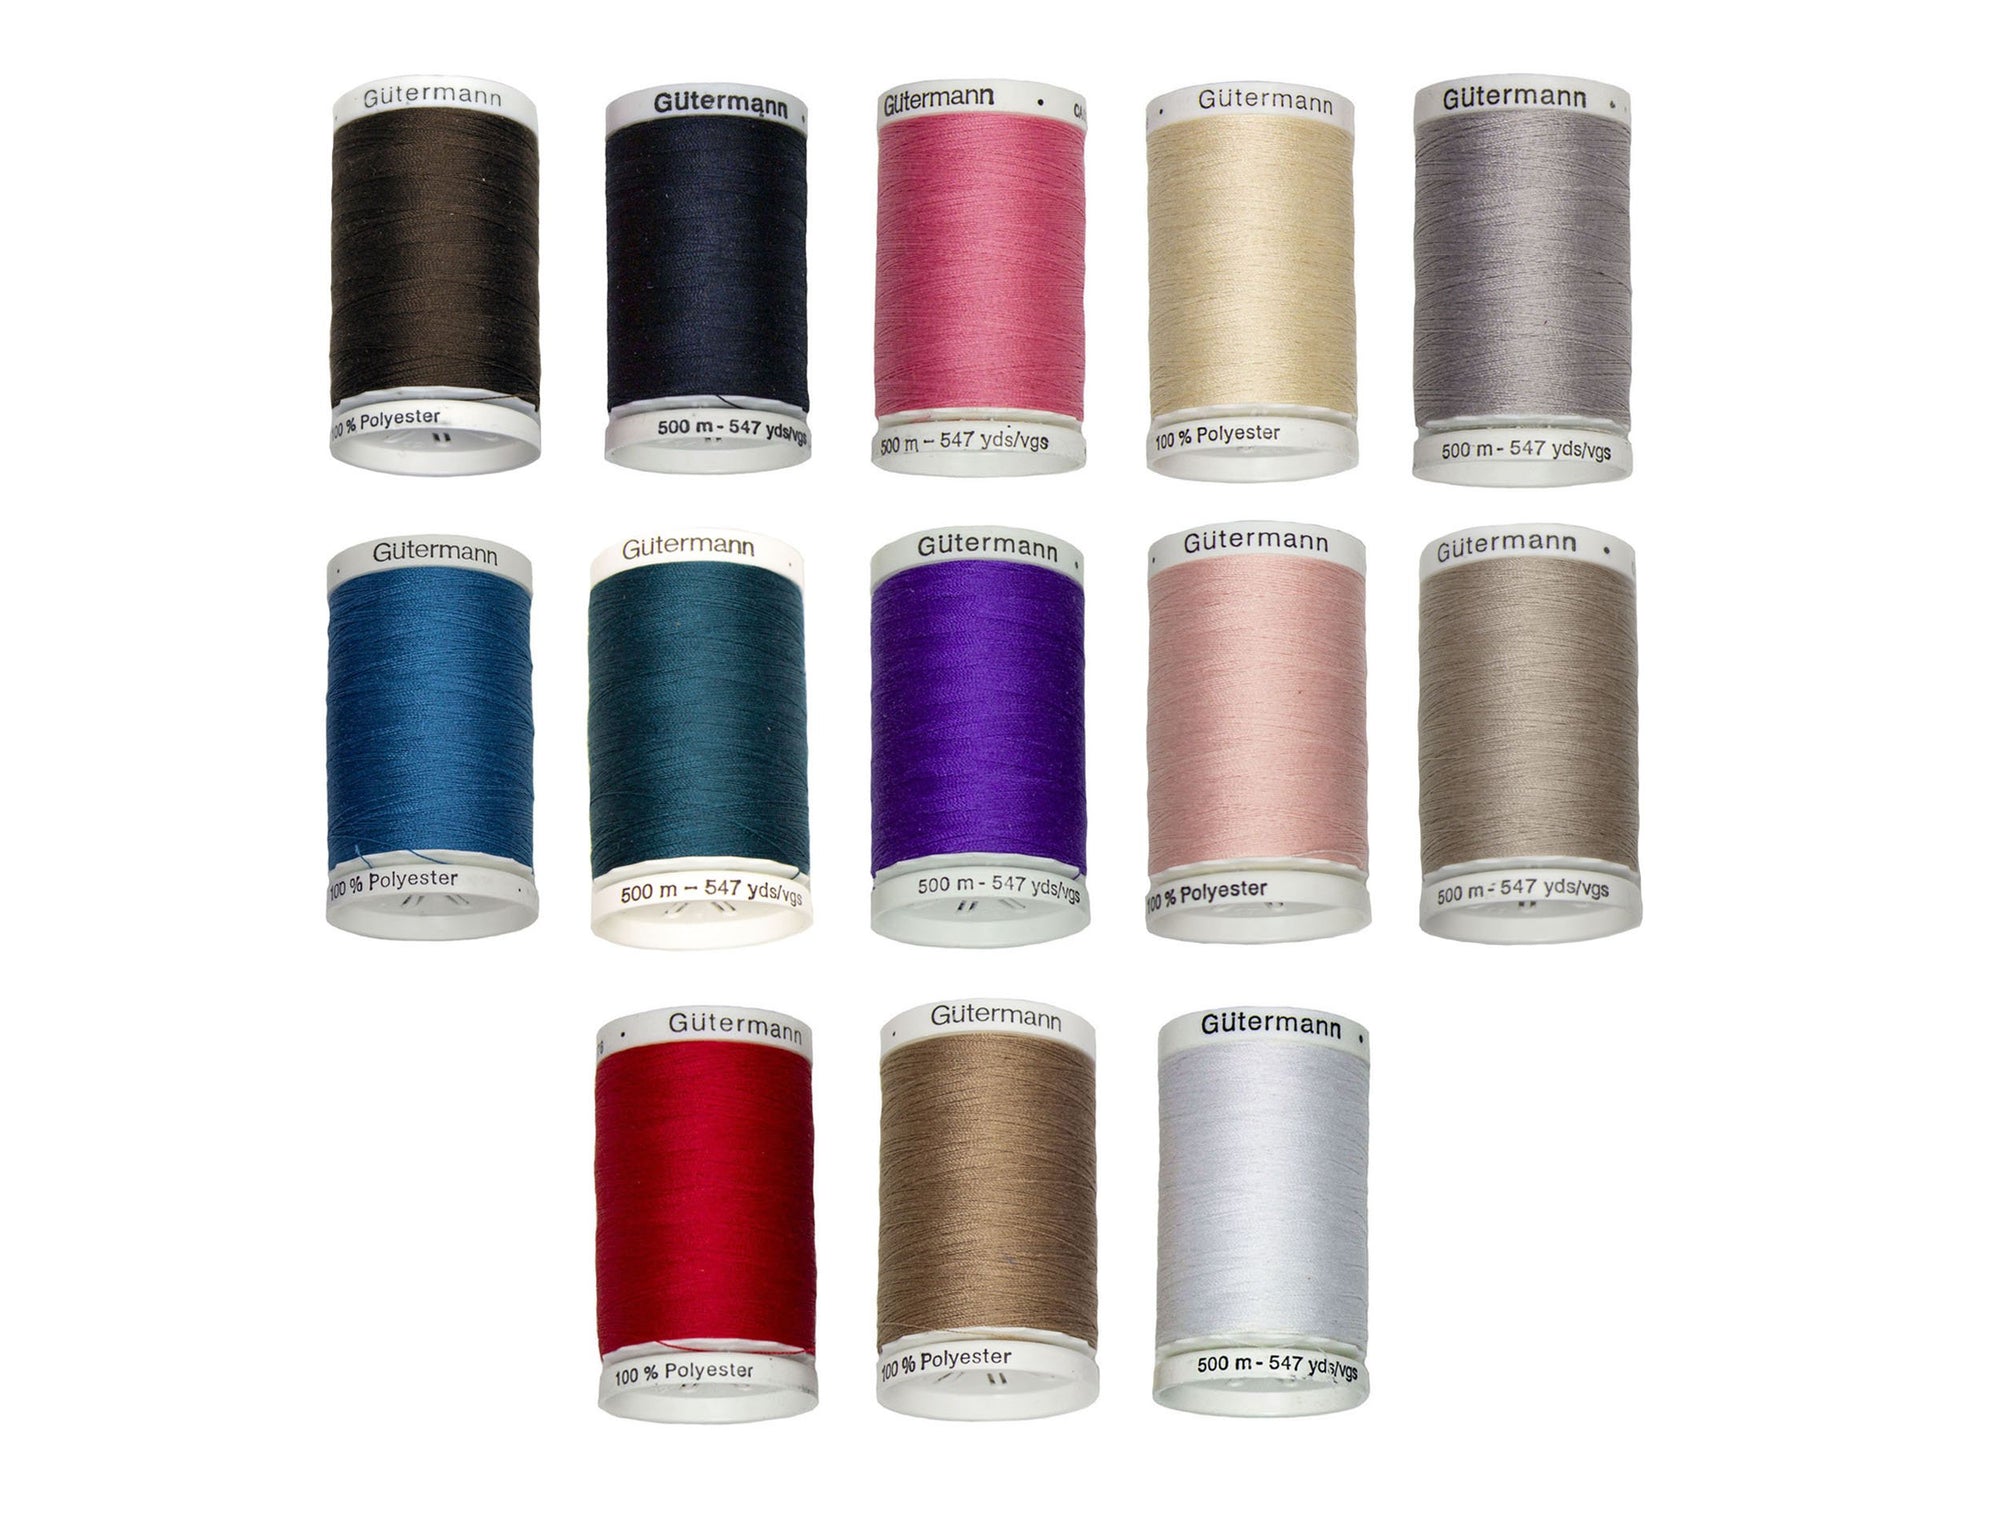 10 NEW Colors GUTERMANN 100% Polyester Sewing Thread 110 Yard